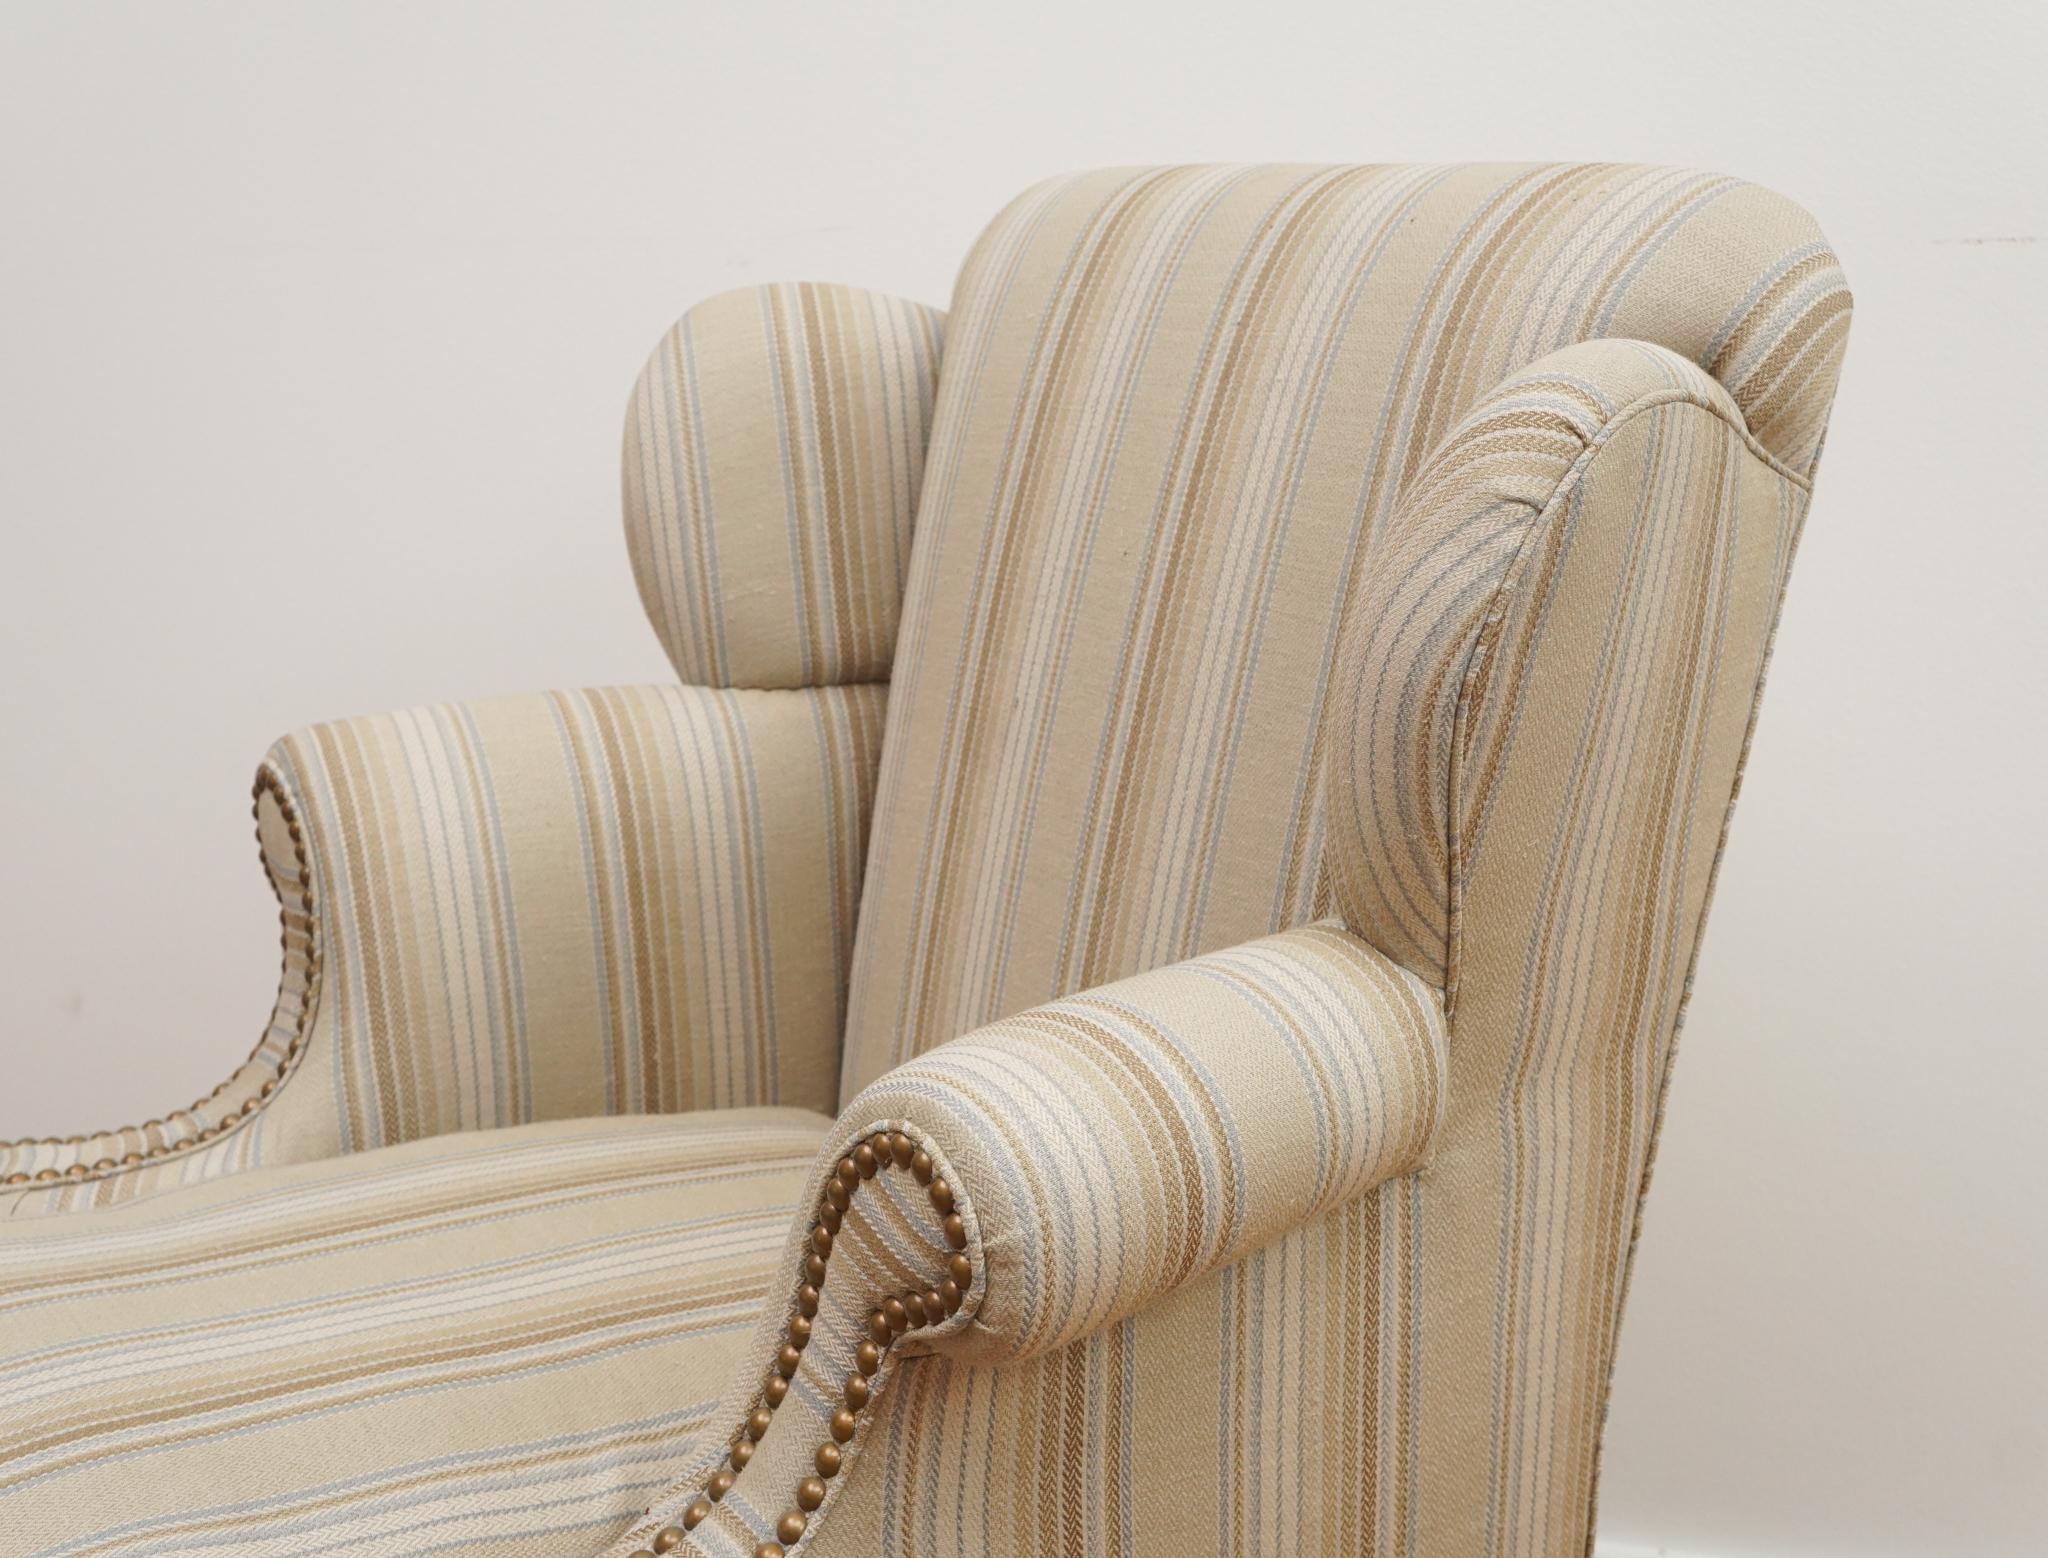 20th Century Petite Queen Anne-Style Wing Chair